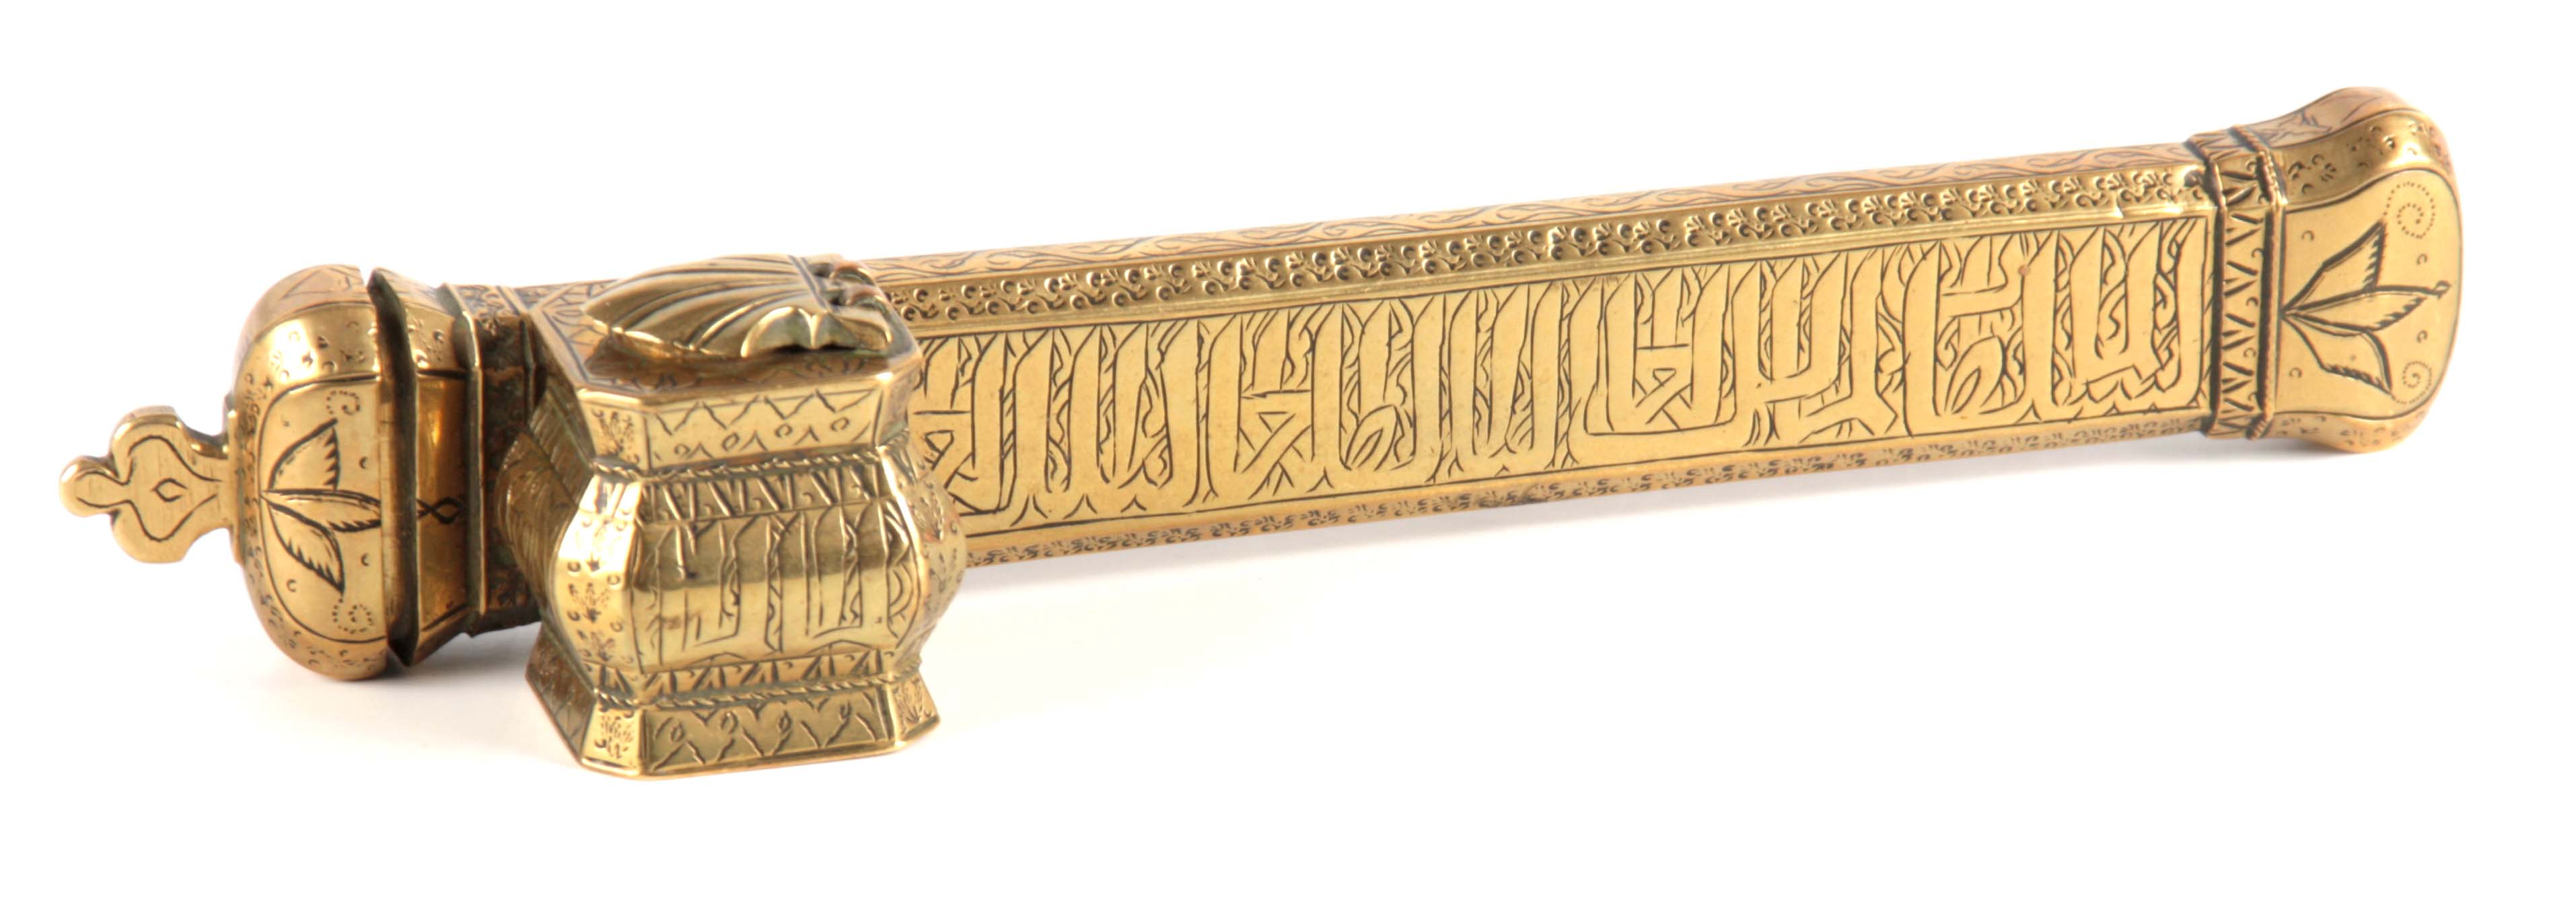 A 19TH CENTURY SIGNED MIDDLE EASTERN BRASS INKWELL QALAMDAN with Arabic calligraphy to the sides.